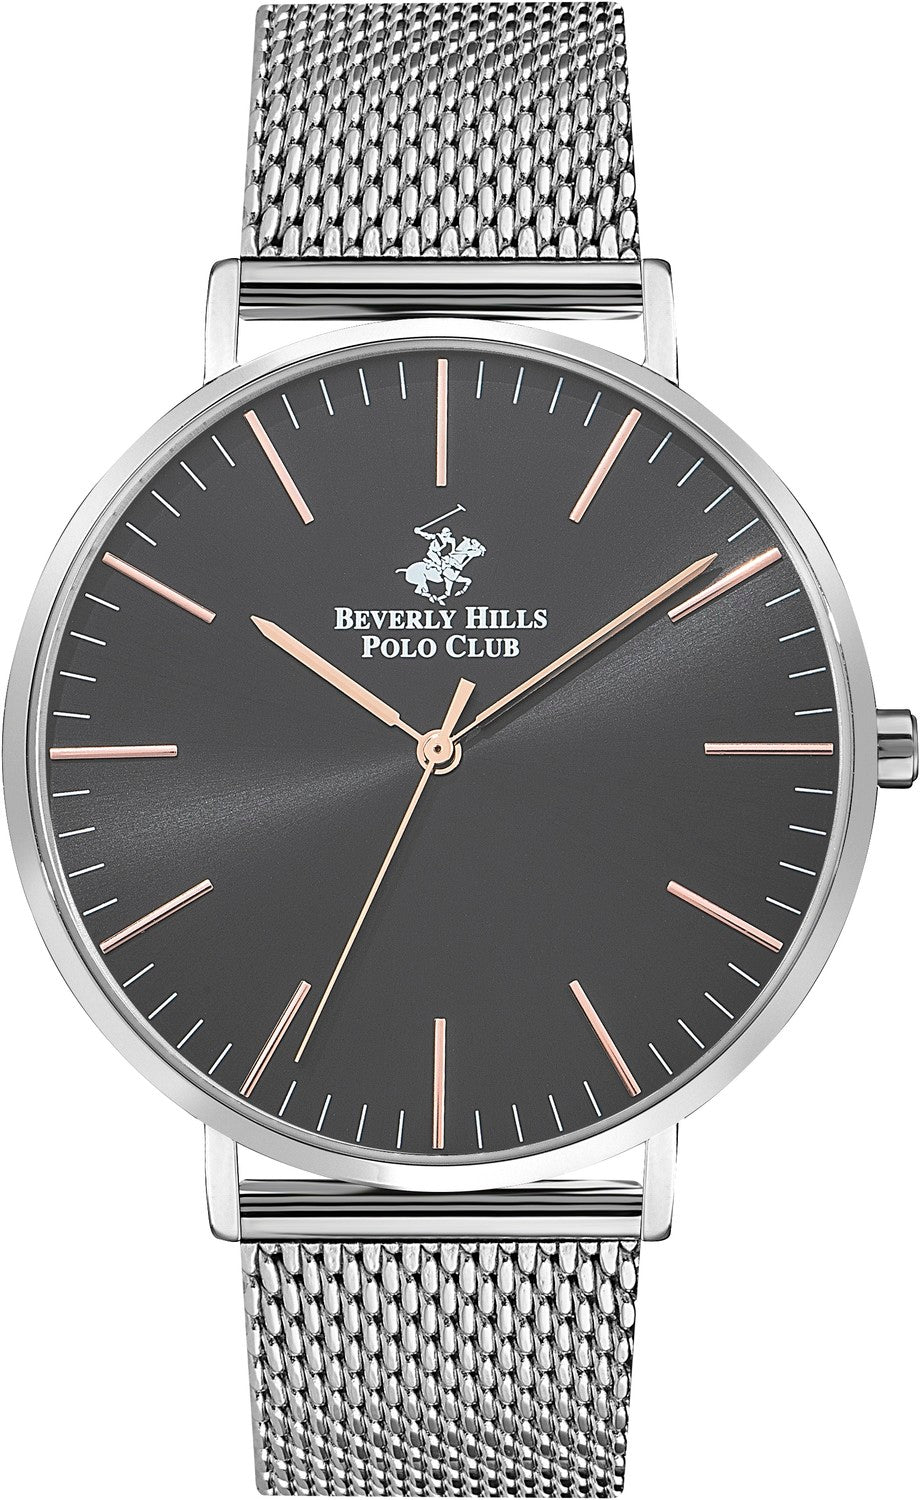 Beverly Hills Polo Club for Men's Watch - BP3130X.360 | Stainless Steel | Mesh Strap | Water-Resistant | Minimal | Quartz Movement | Lifestyle | Business | Scratch-resistant | Fashionable | Halabh.com